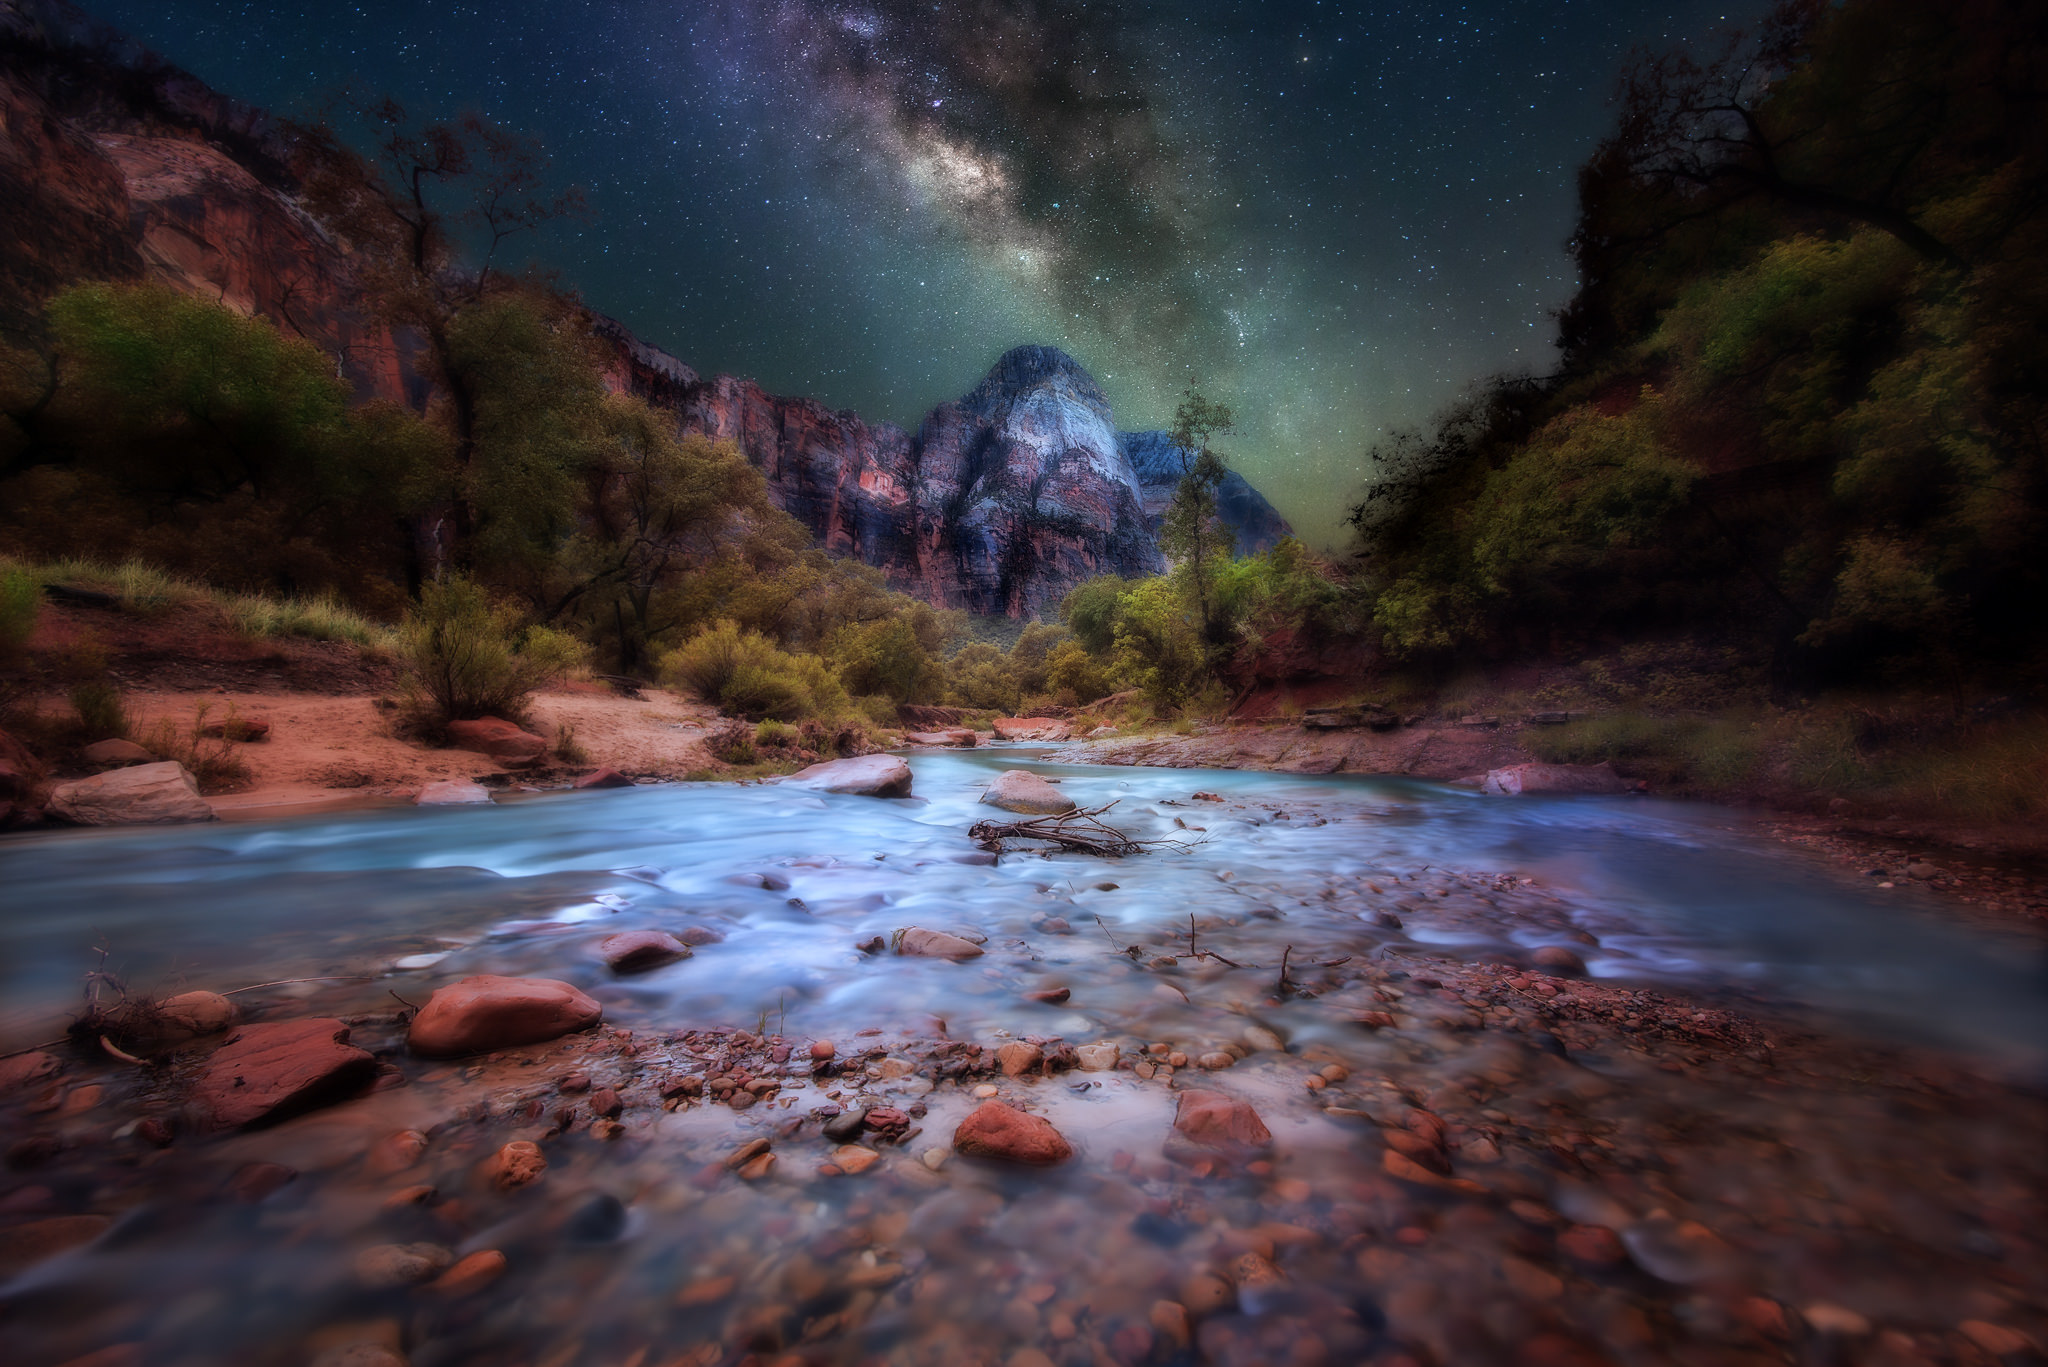 zion national park, earth, cliff, milky way, mountain, nature, night, river, stars, stone, utah, national park